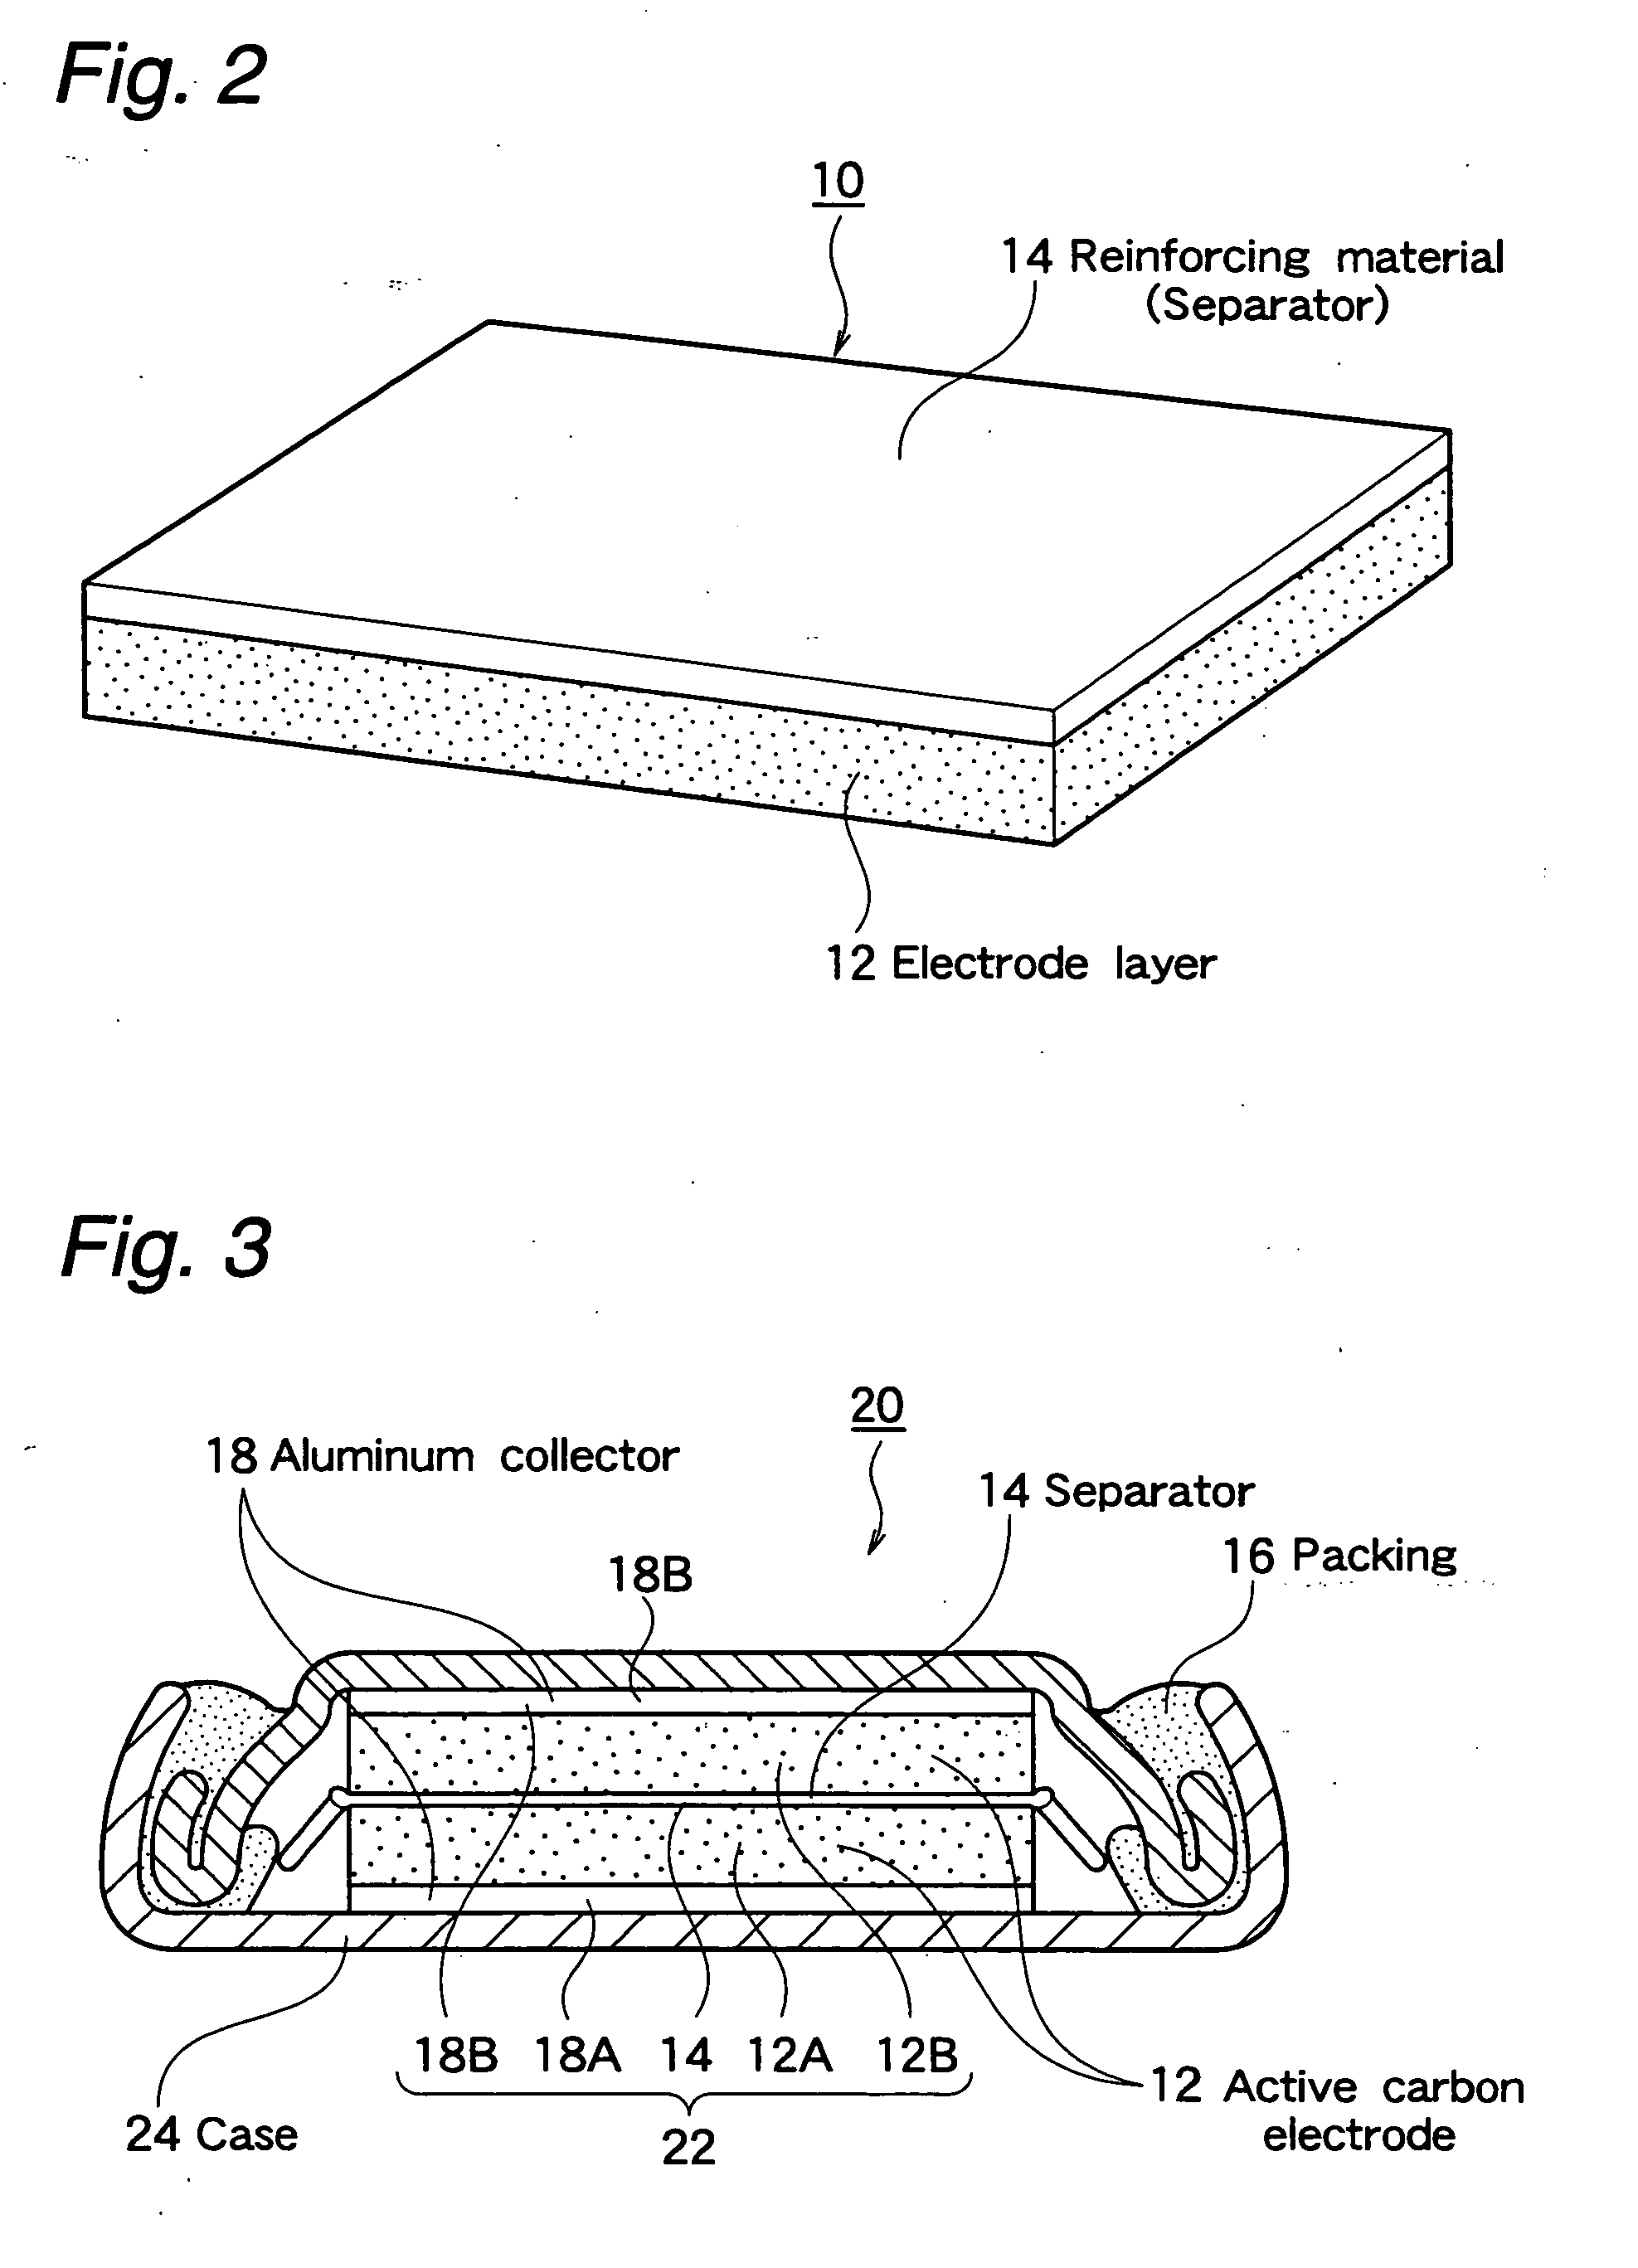 Reinforcing material-carrying functional sheet